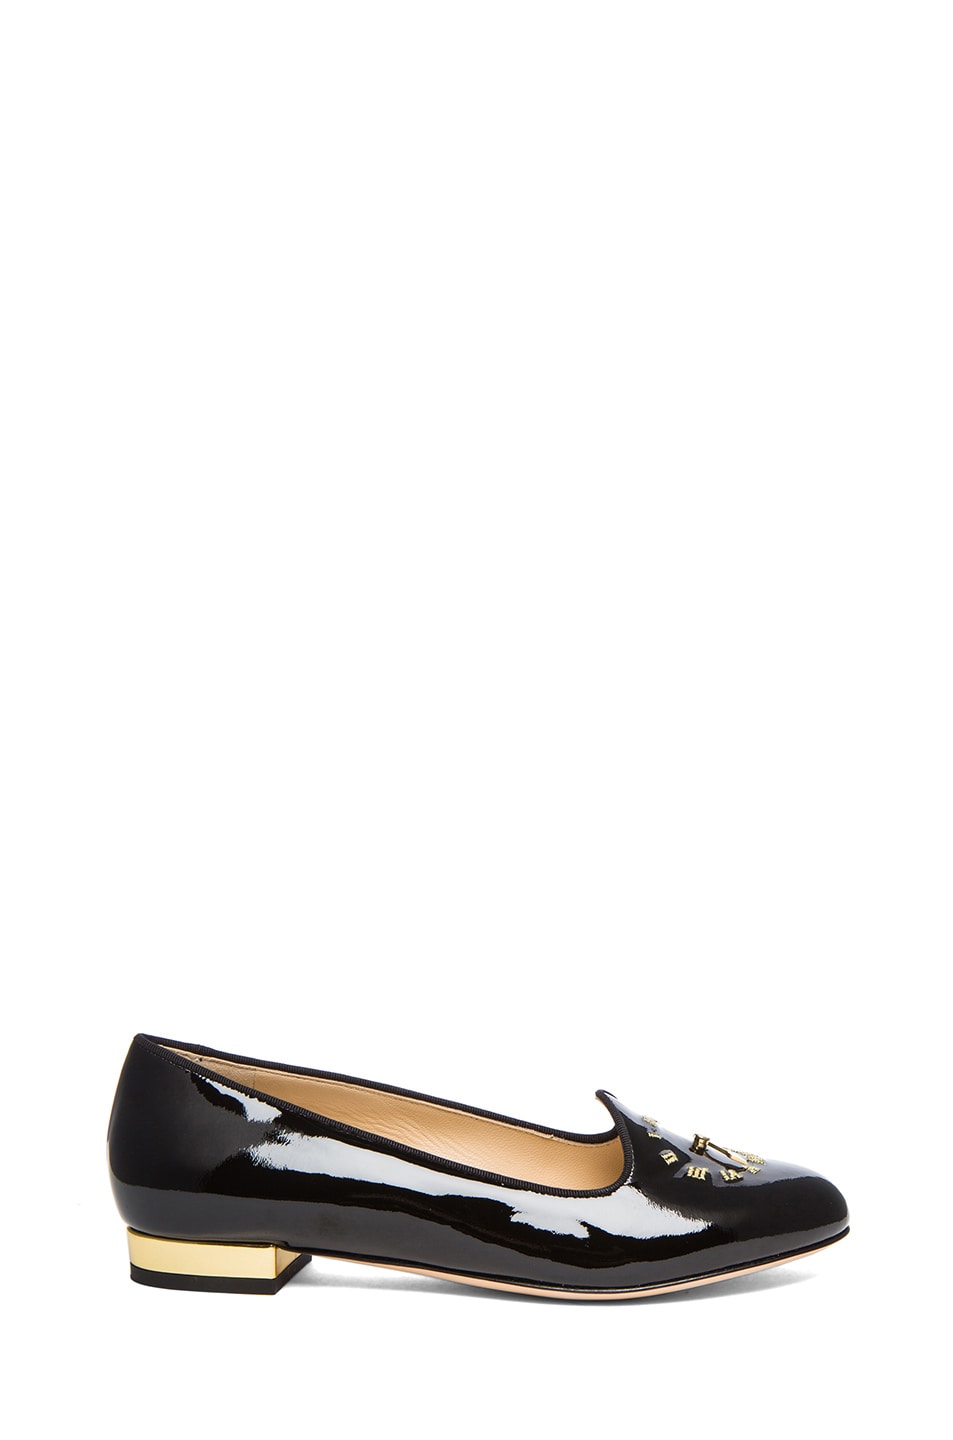 Charlotte Olympia Fashionably Late Patent Leather Flats in Black | FWRD